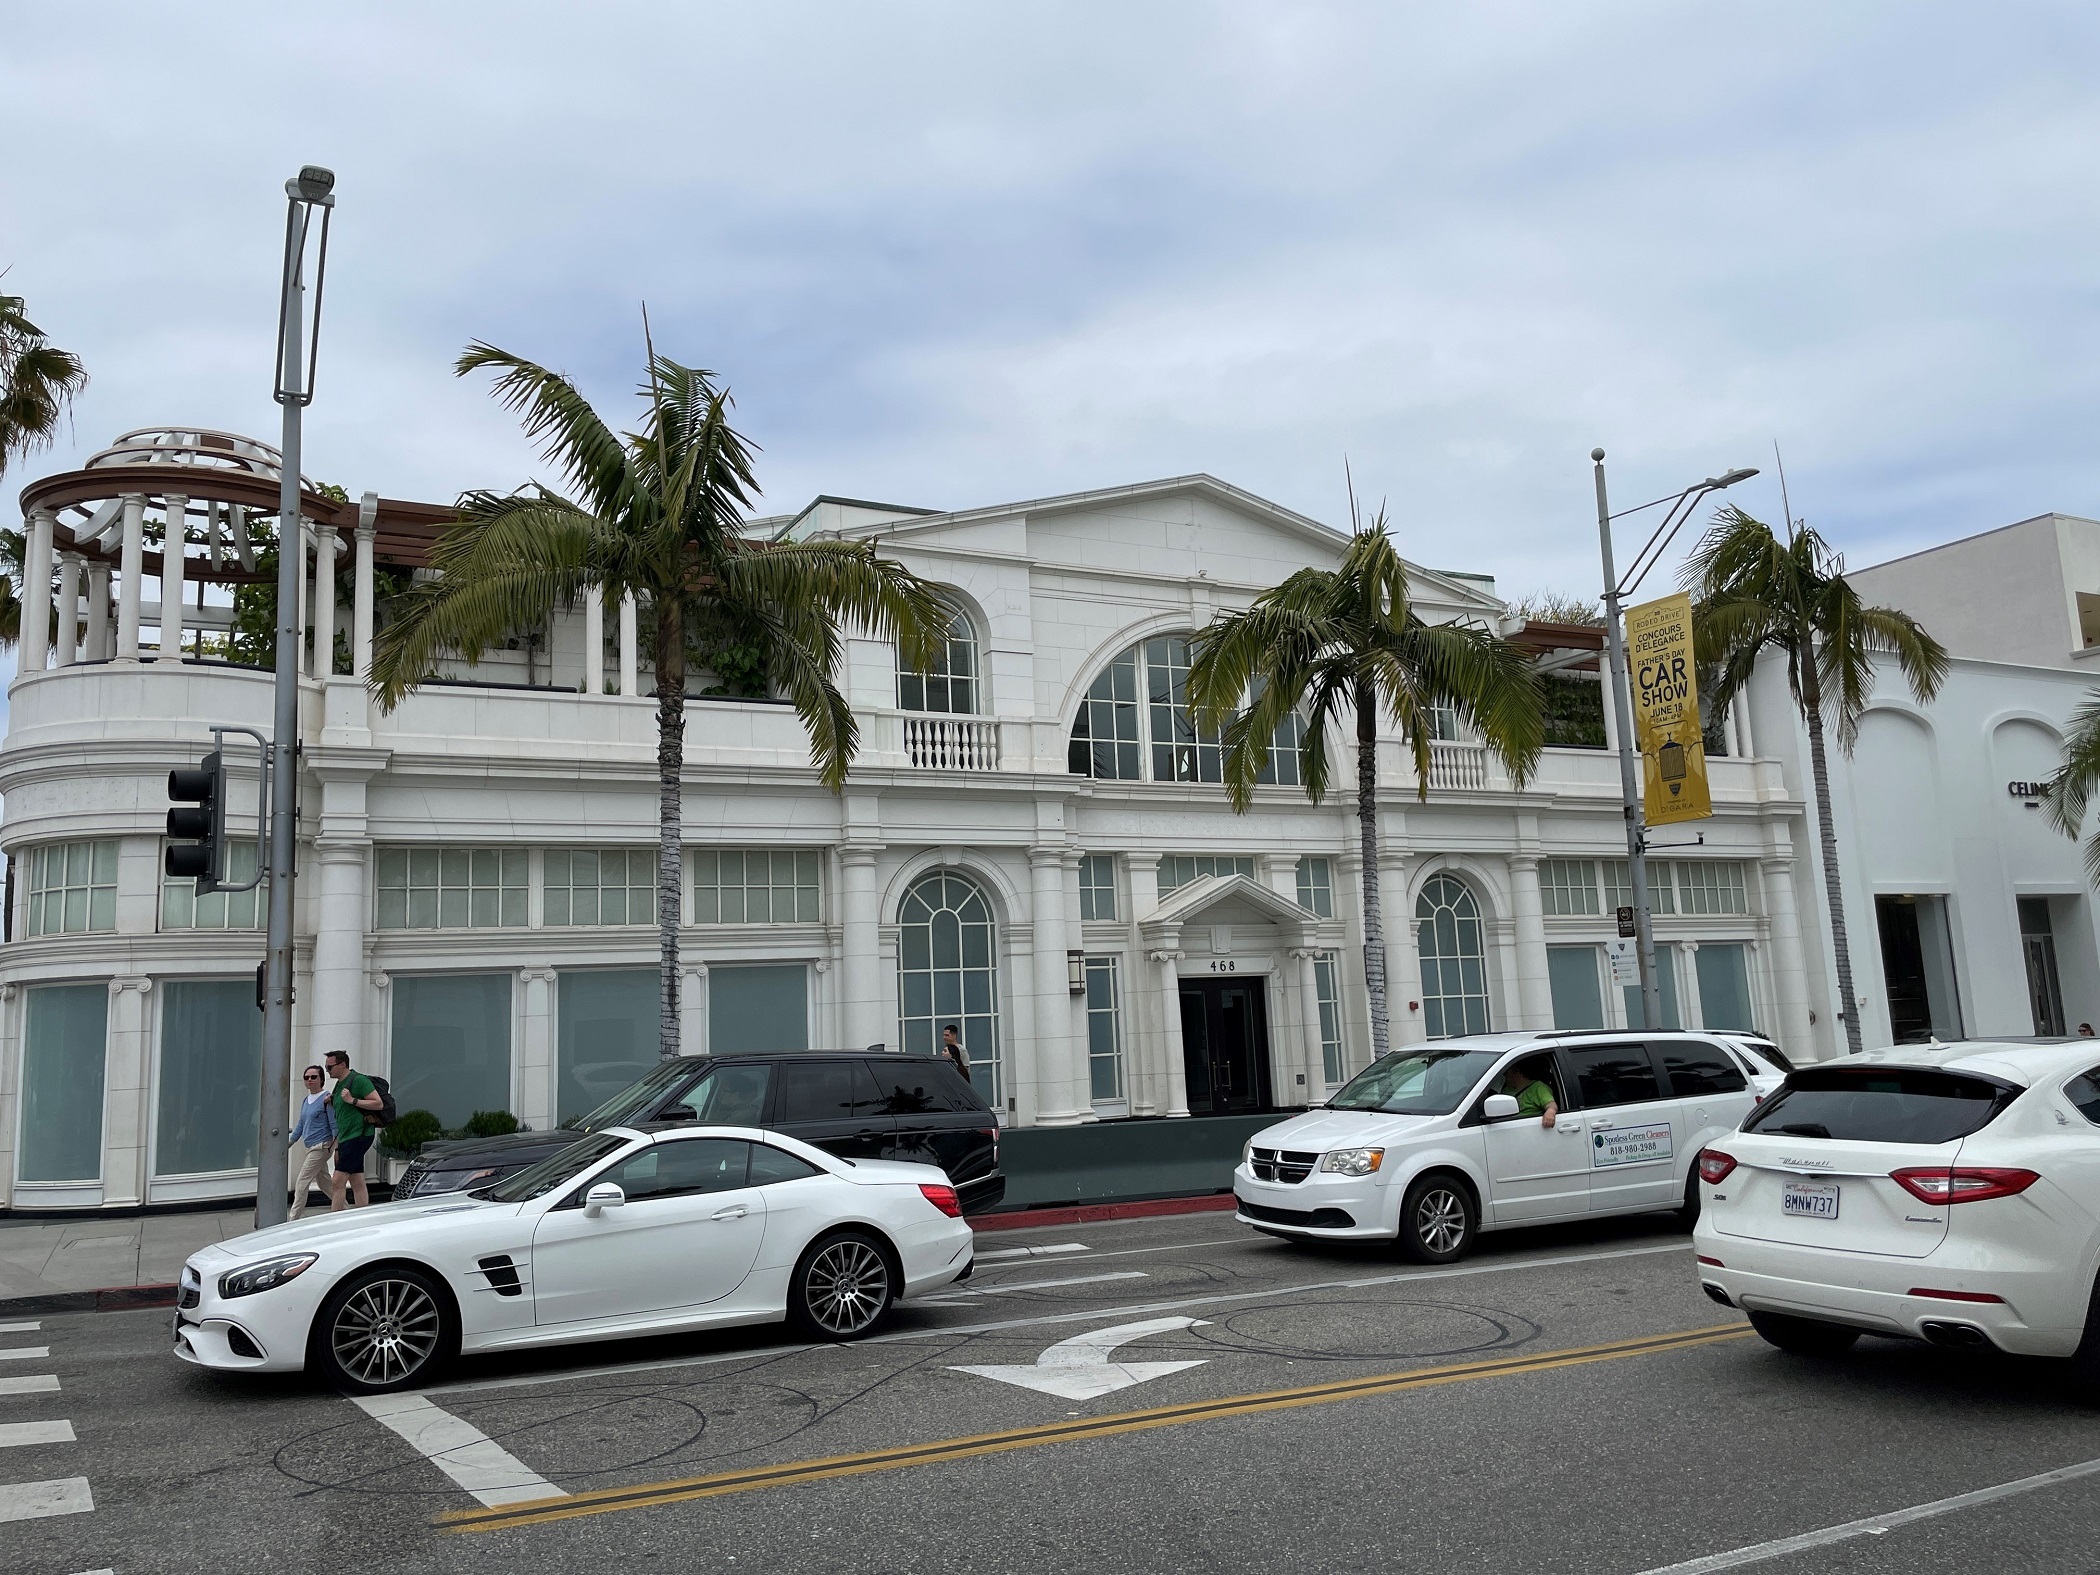 The boarded-up 468 N. Rodeo Drive in Beverly Hills, California, was the site of little activity on an overcast afternoon on May 26. (Jack Witthaus/CoStar)